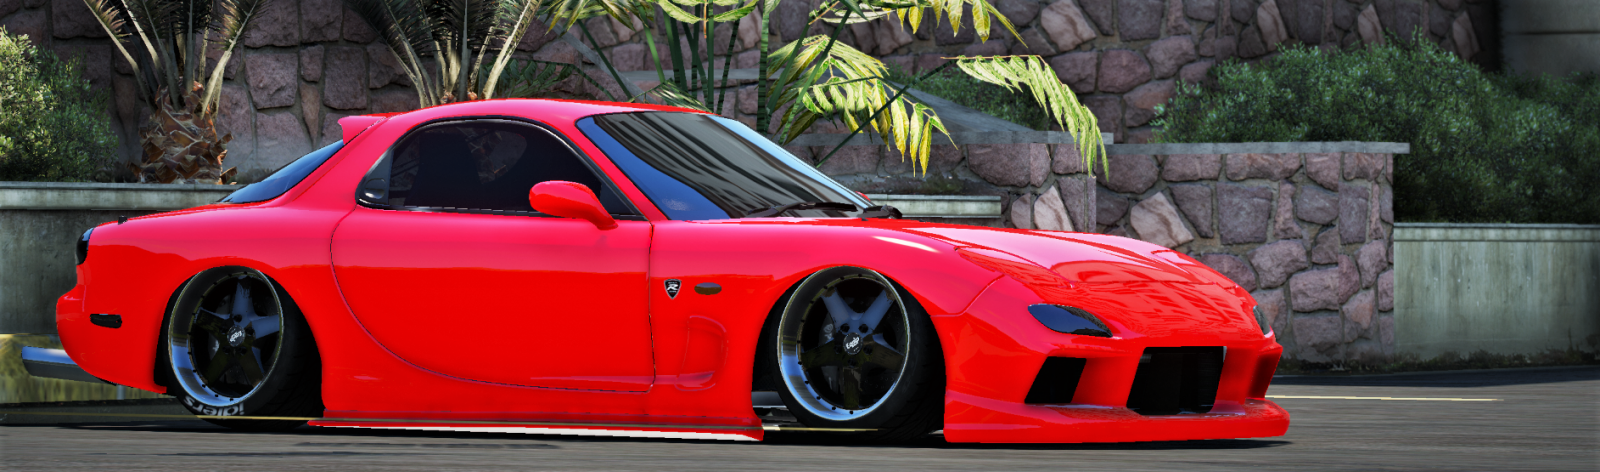 RX777.2.png